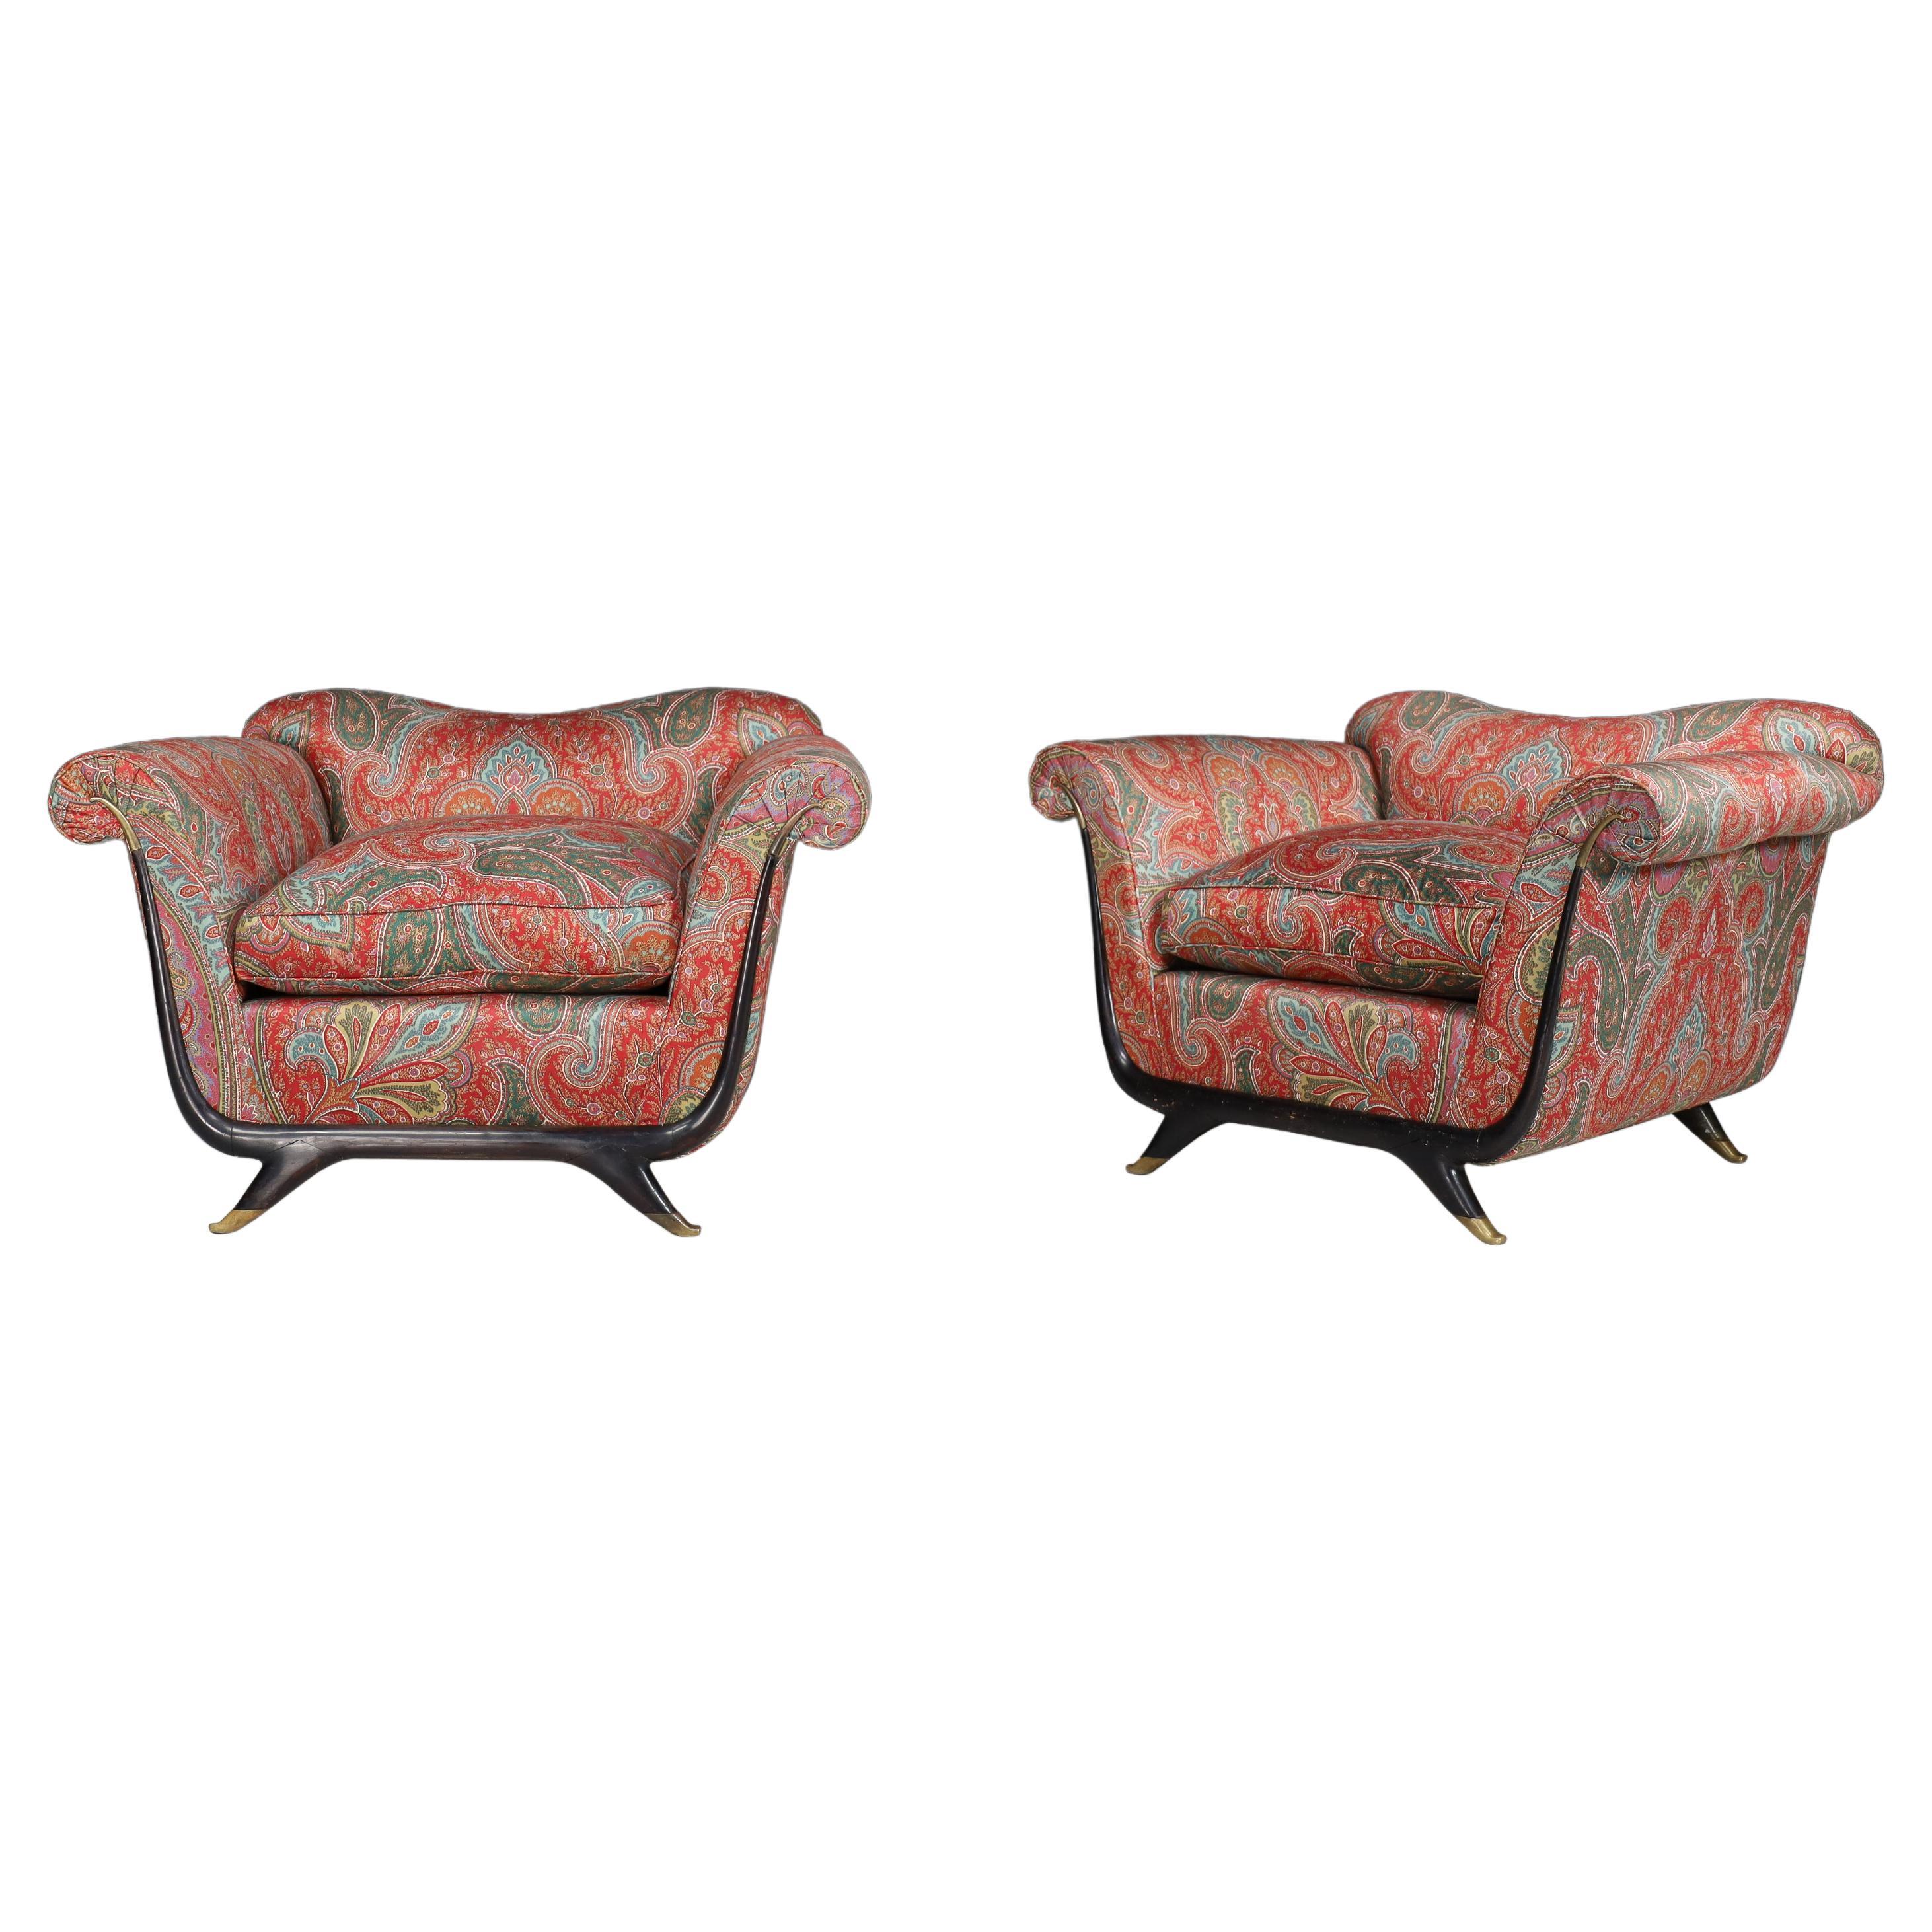 Guglielmo Ulrich Lounge Chairs in Walnut, Fabric, and Brass, Italy, 1930s  For Sale